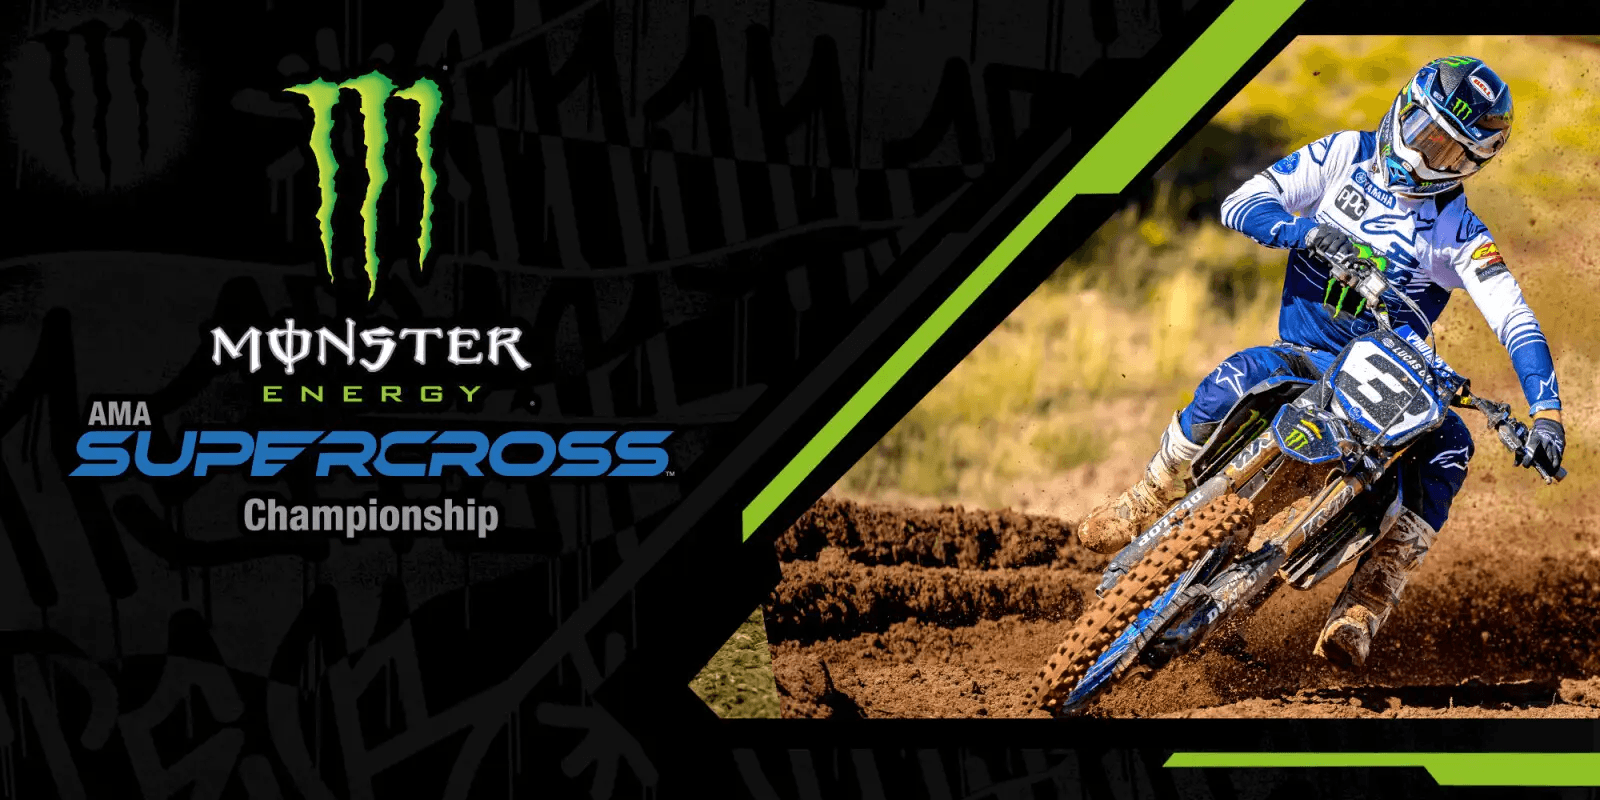 How to Watch Monster Energy Supercross Without Cable Beginning January 8